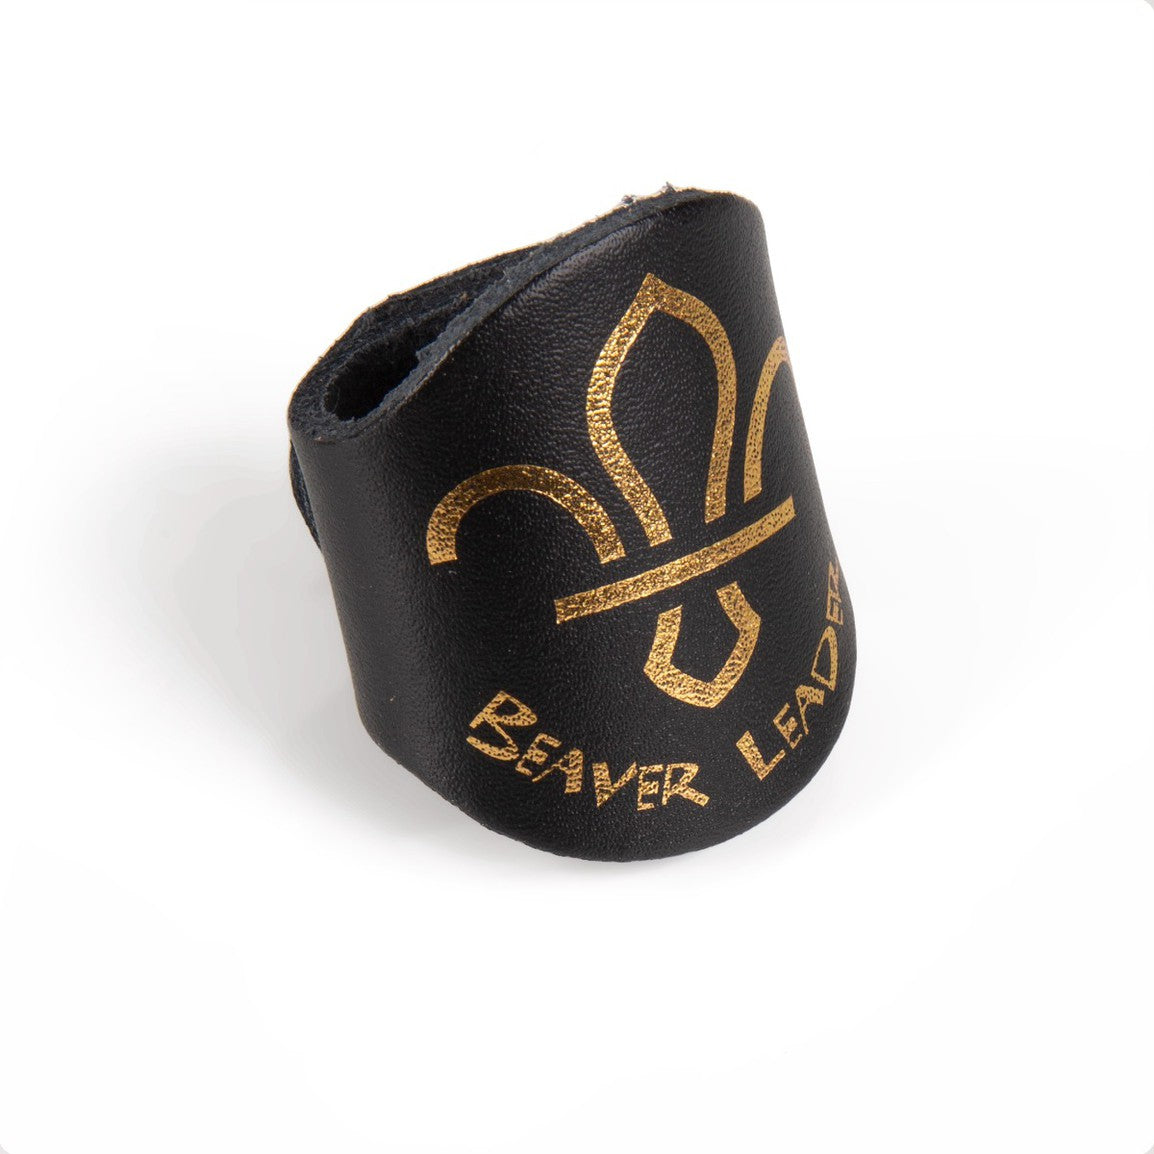 Beaver Scouts Leader Leather Woggle